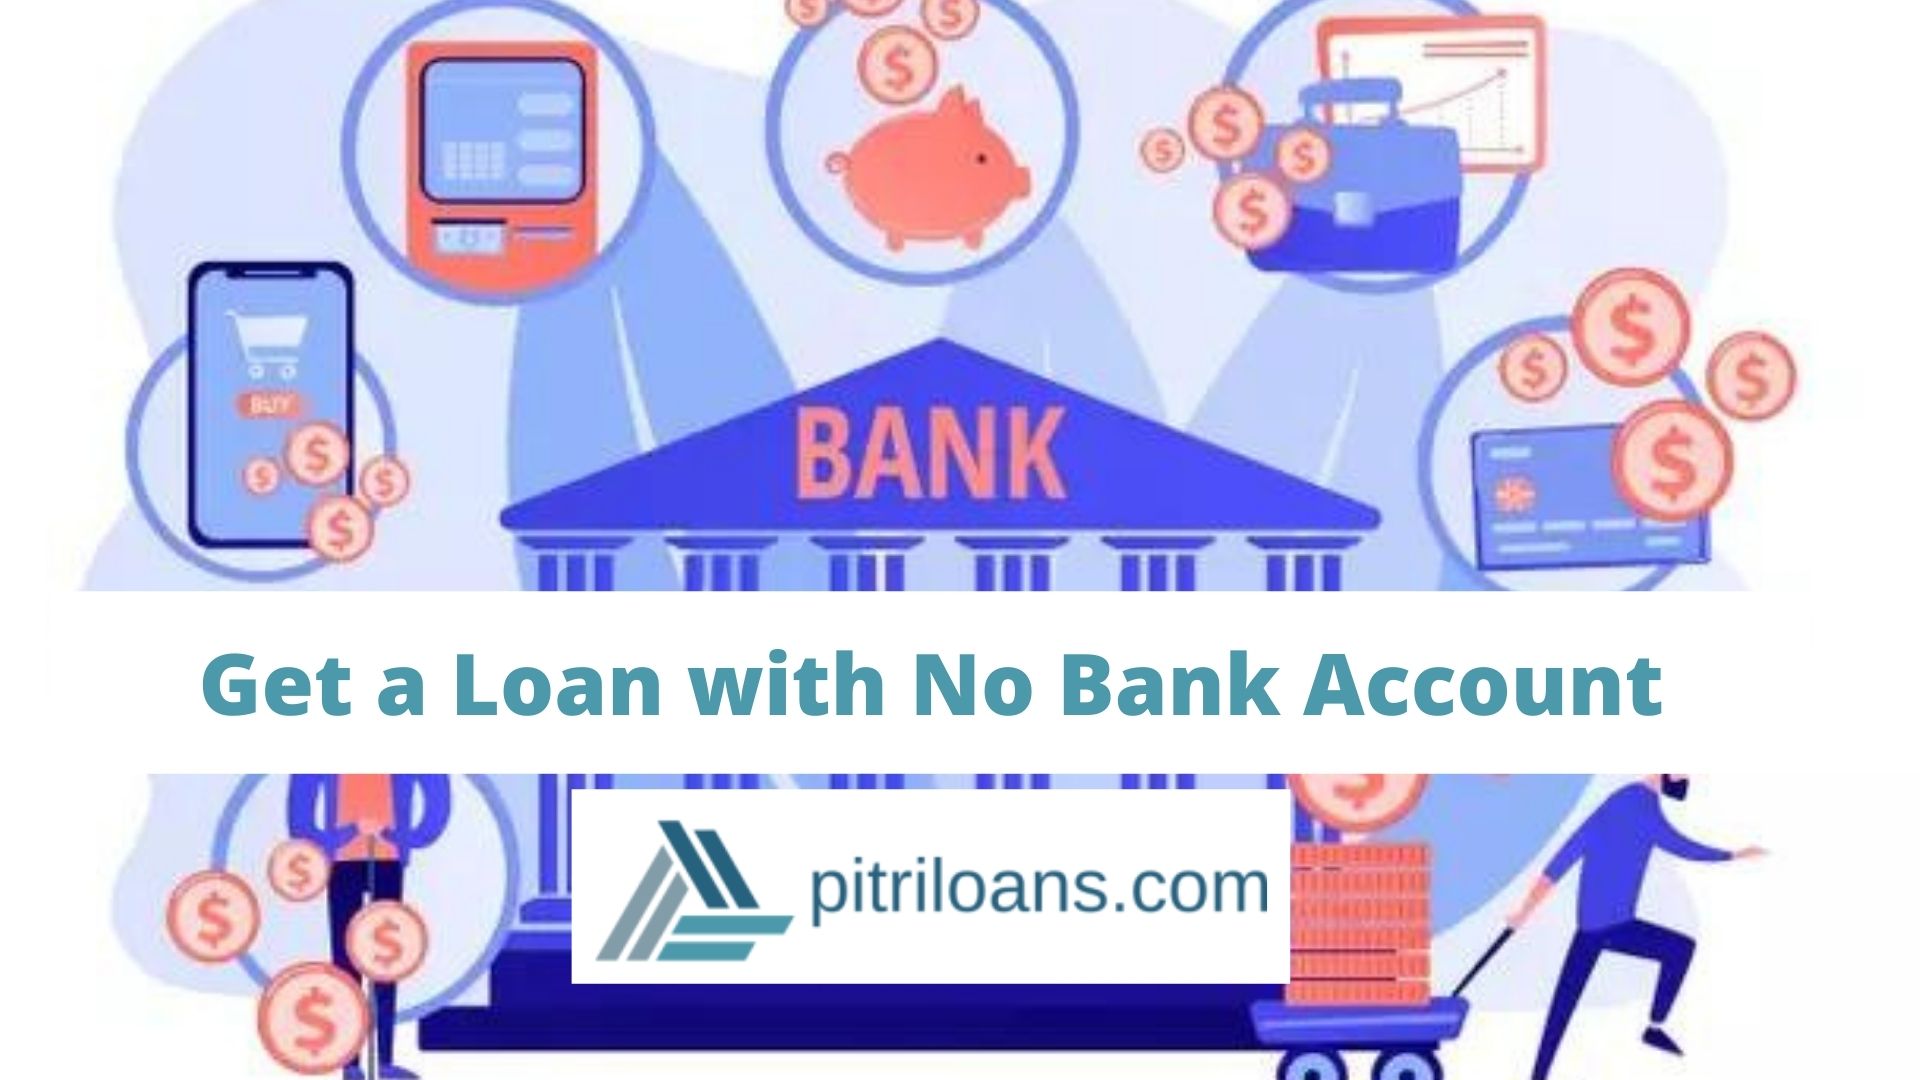 How to get a loan without a bank account